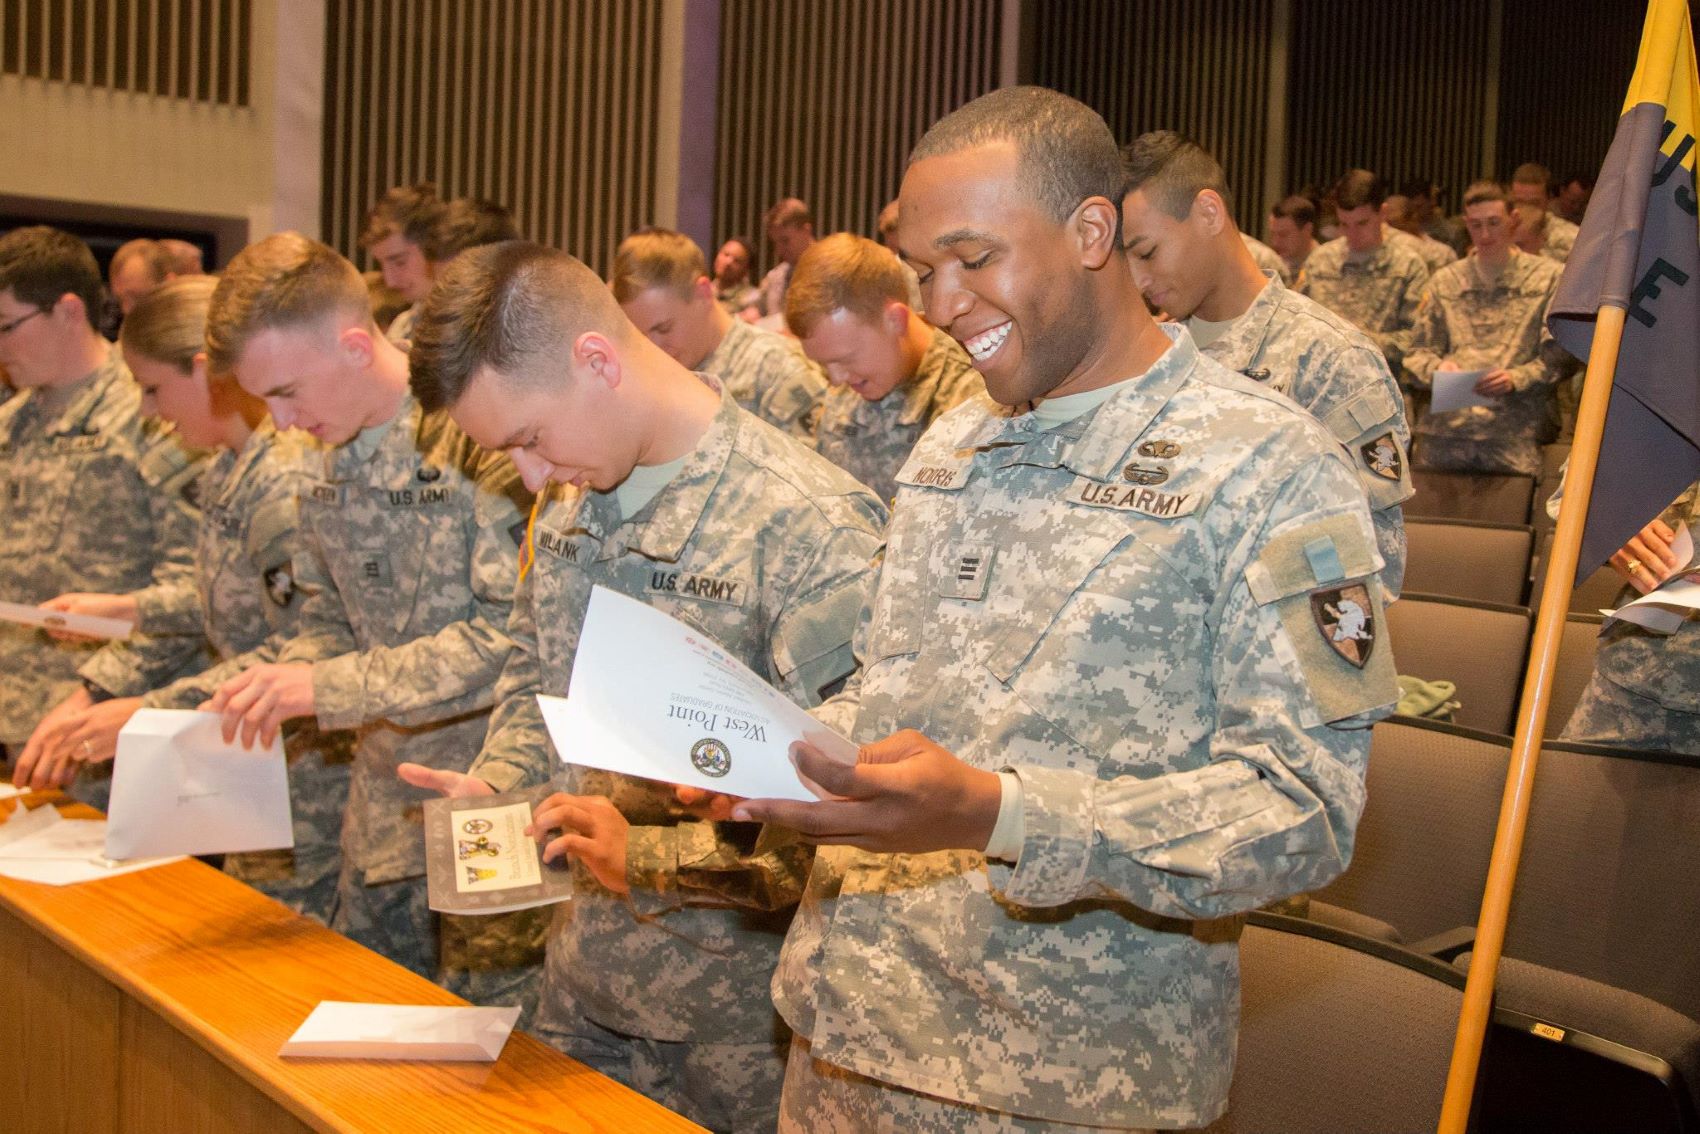 WestPoint students receive award and certificate